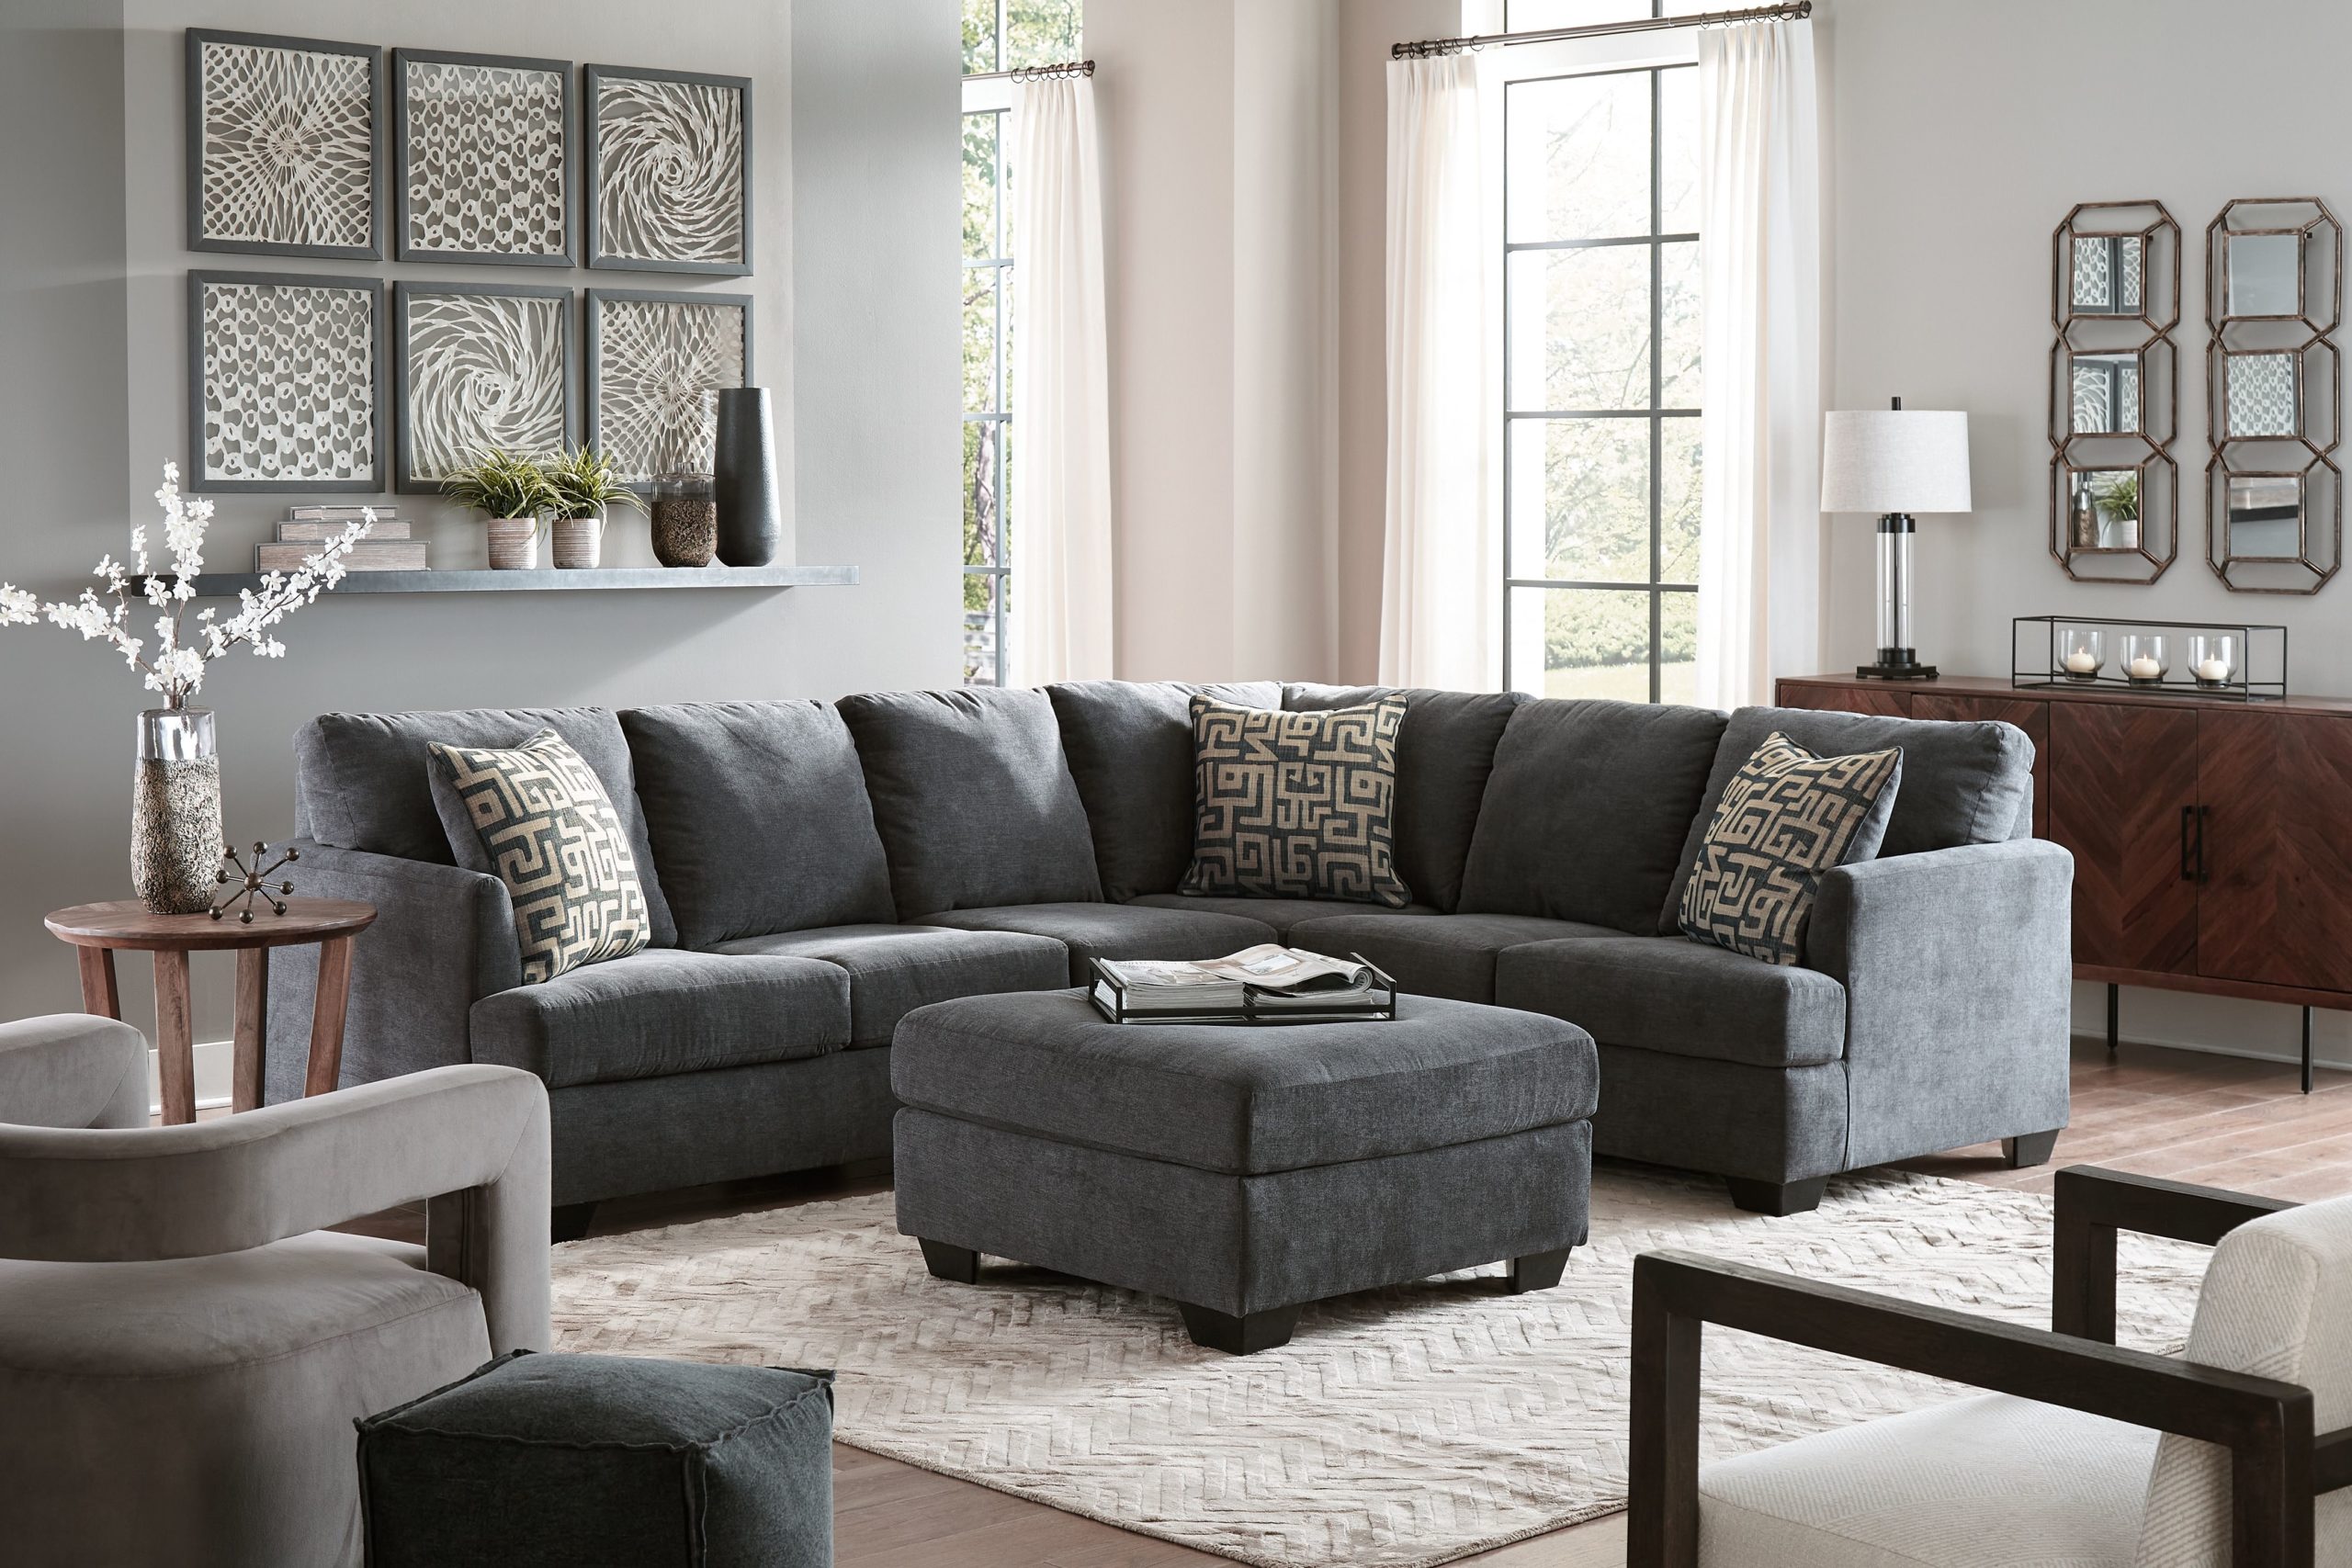 Ashley Furniture Ambrielle Metal 4 Pc Right Arm Facing Sofa With Corner Wedge 3 Sectional Ottoman Ez S Leasing